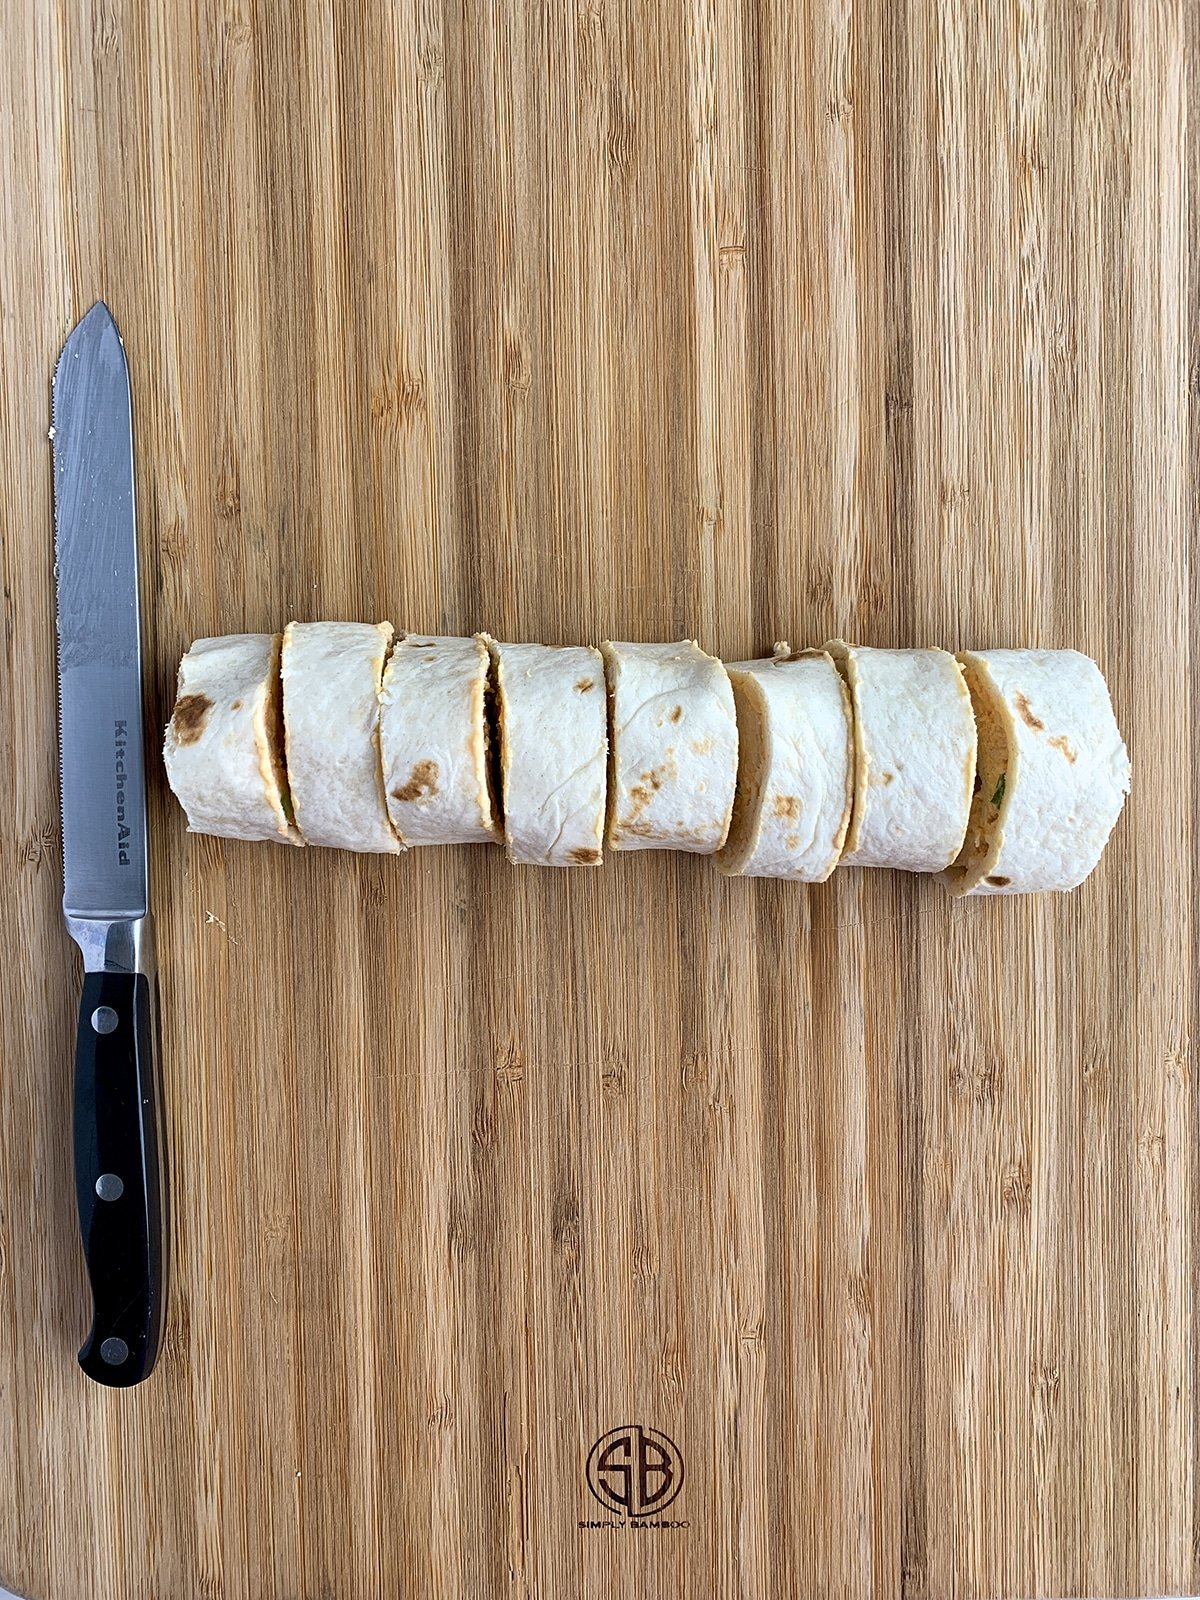 Buffalo Chicken Pinwheel tortilla cut up into 8 pieces on a wooden cutting board with a serrated knife